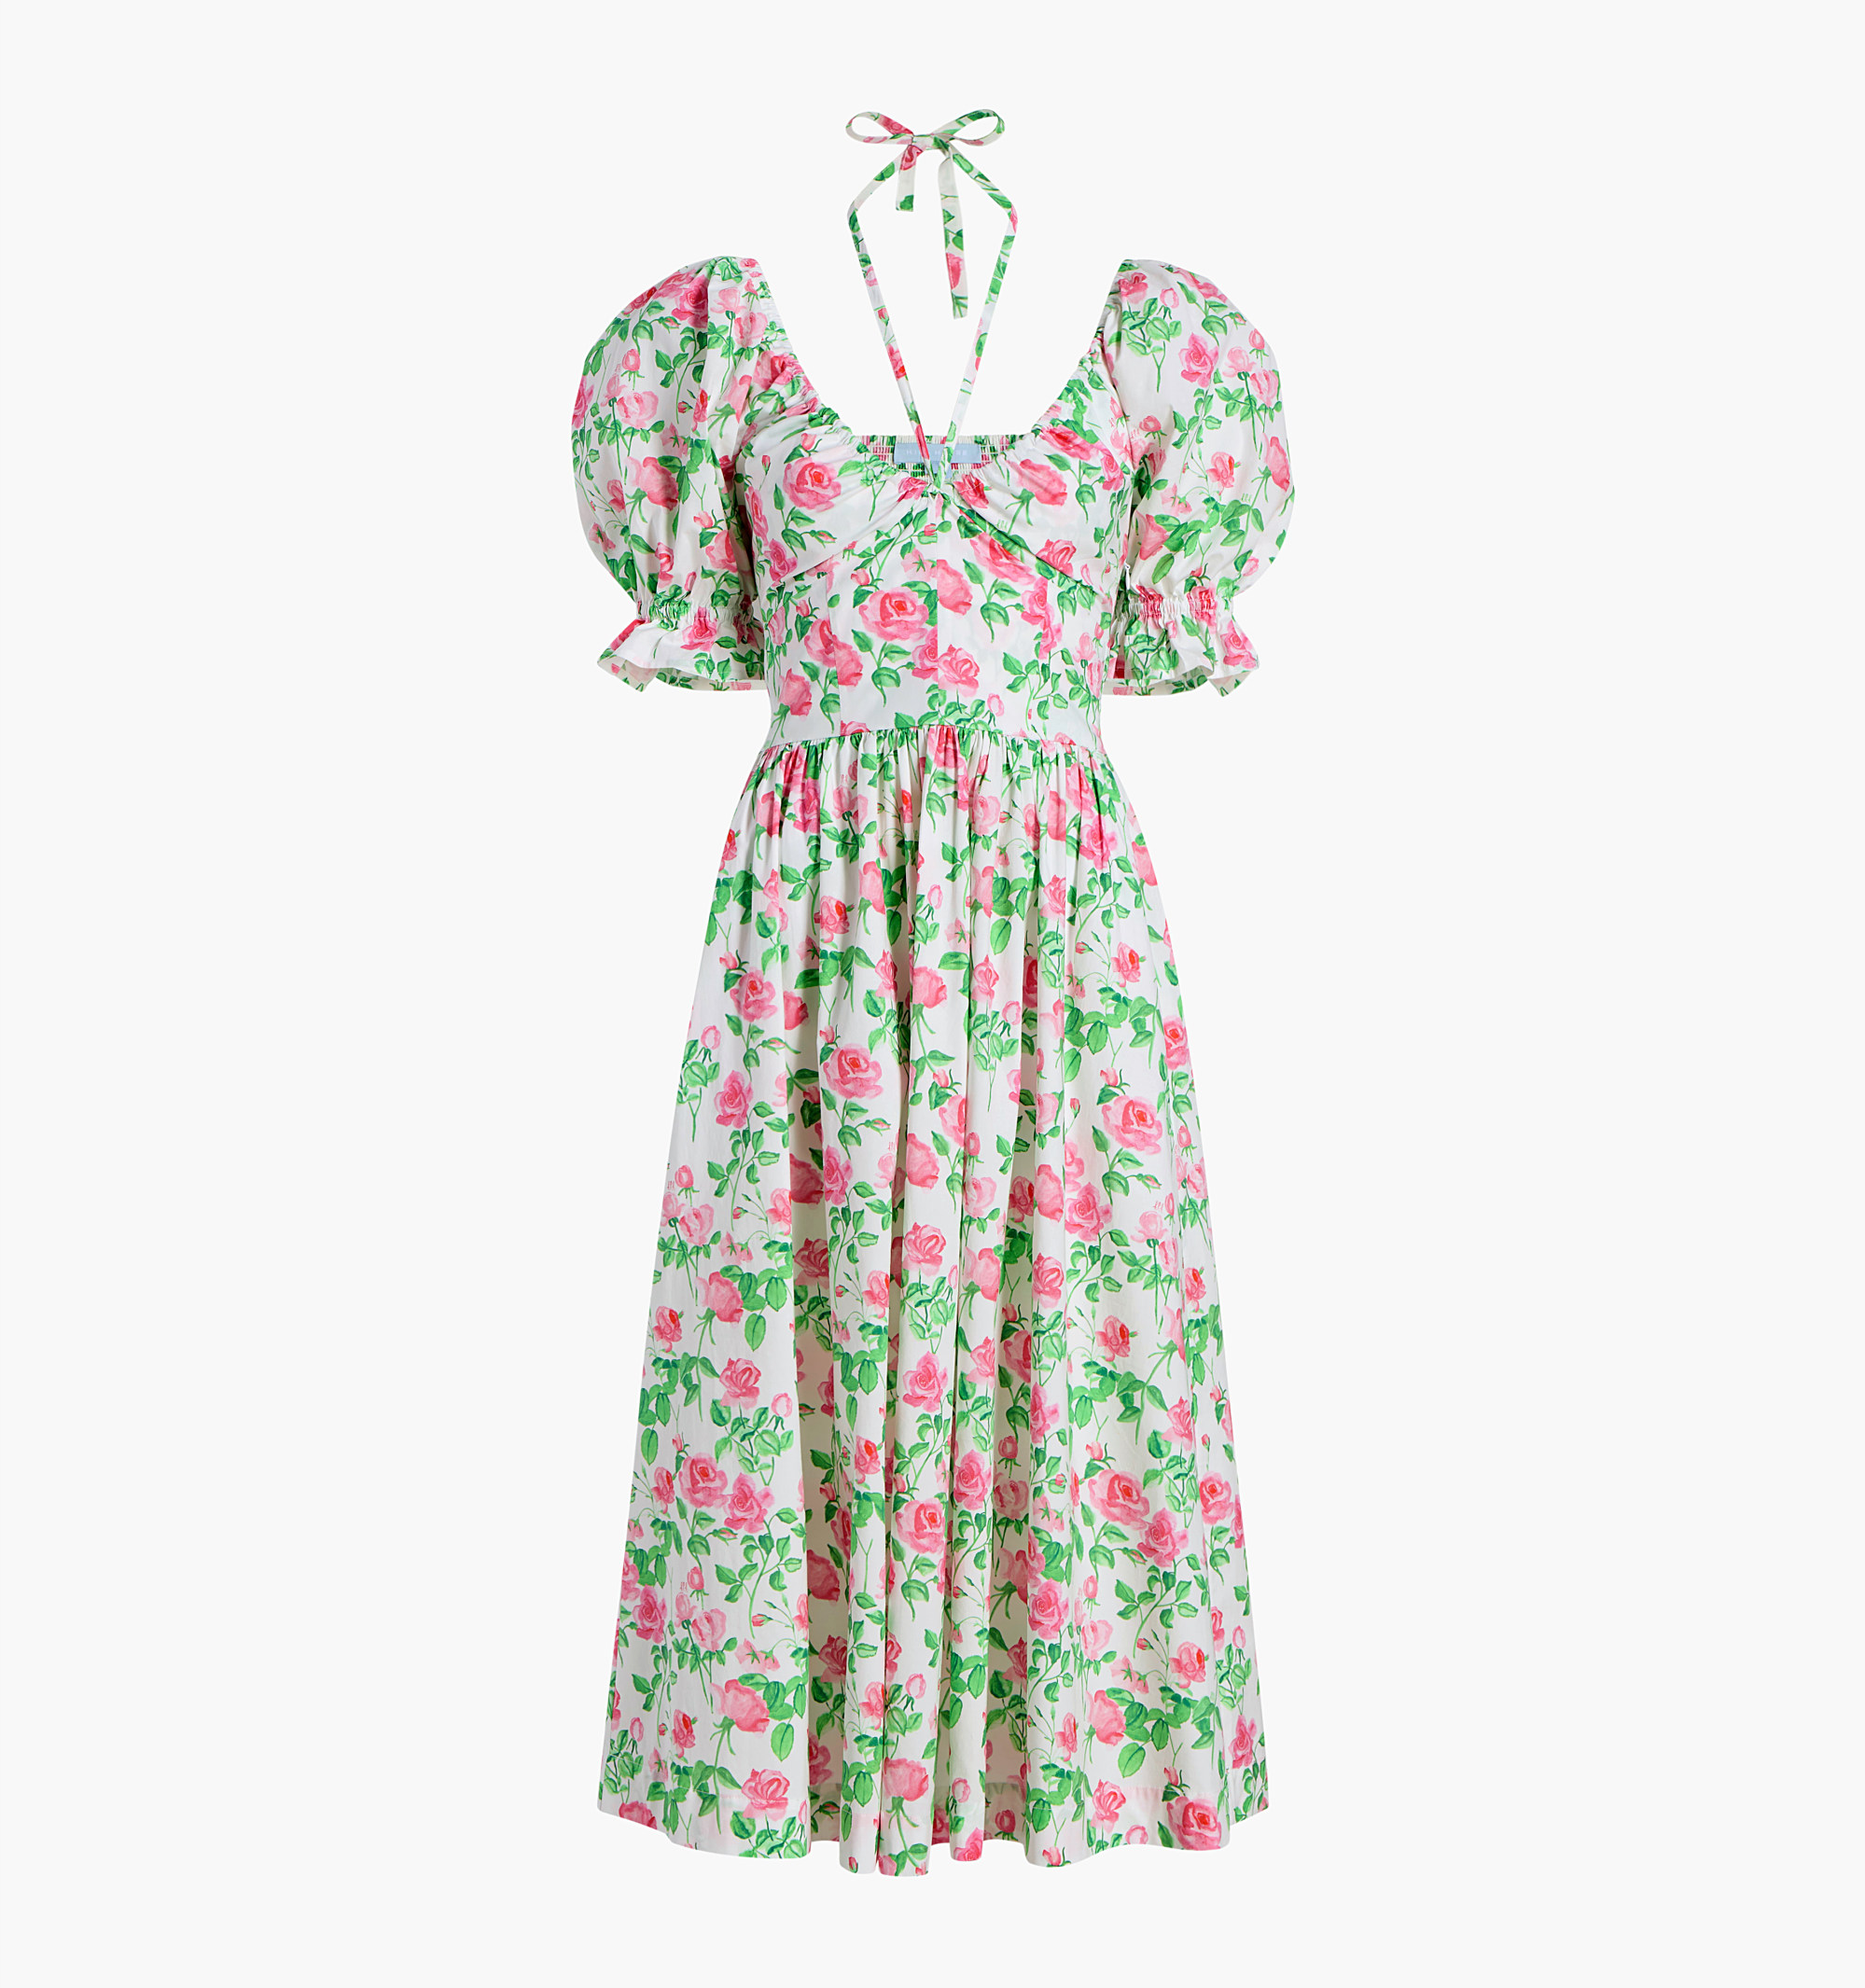 What is a nap dress? Floral smocked dresses are popular post-Covid as ...